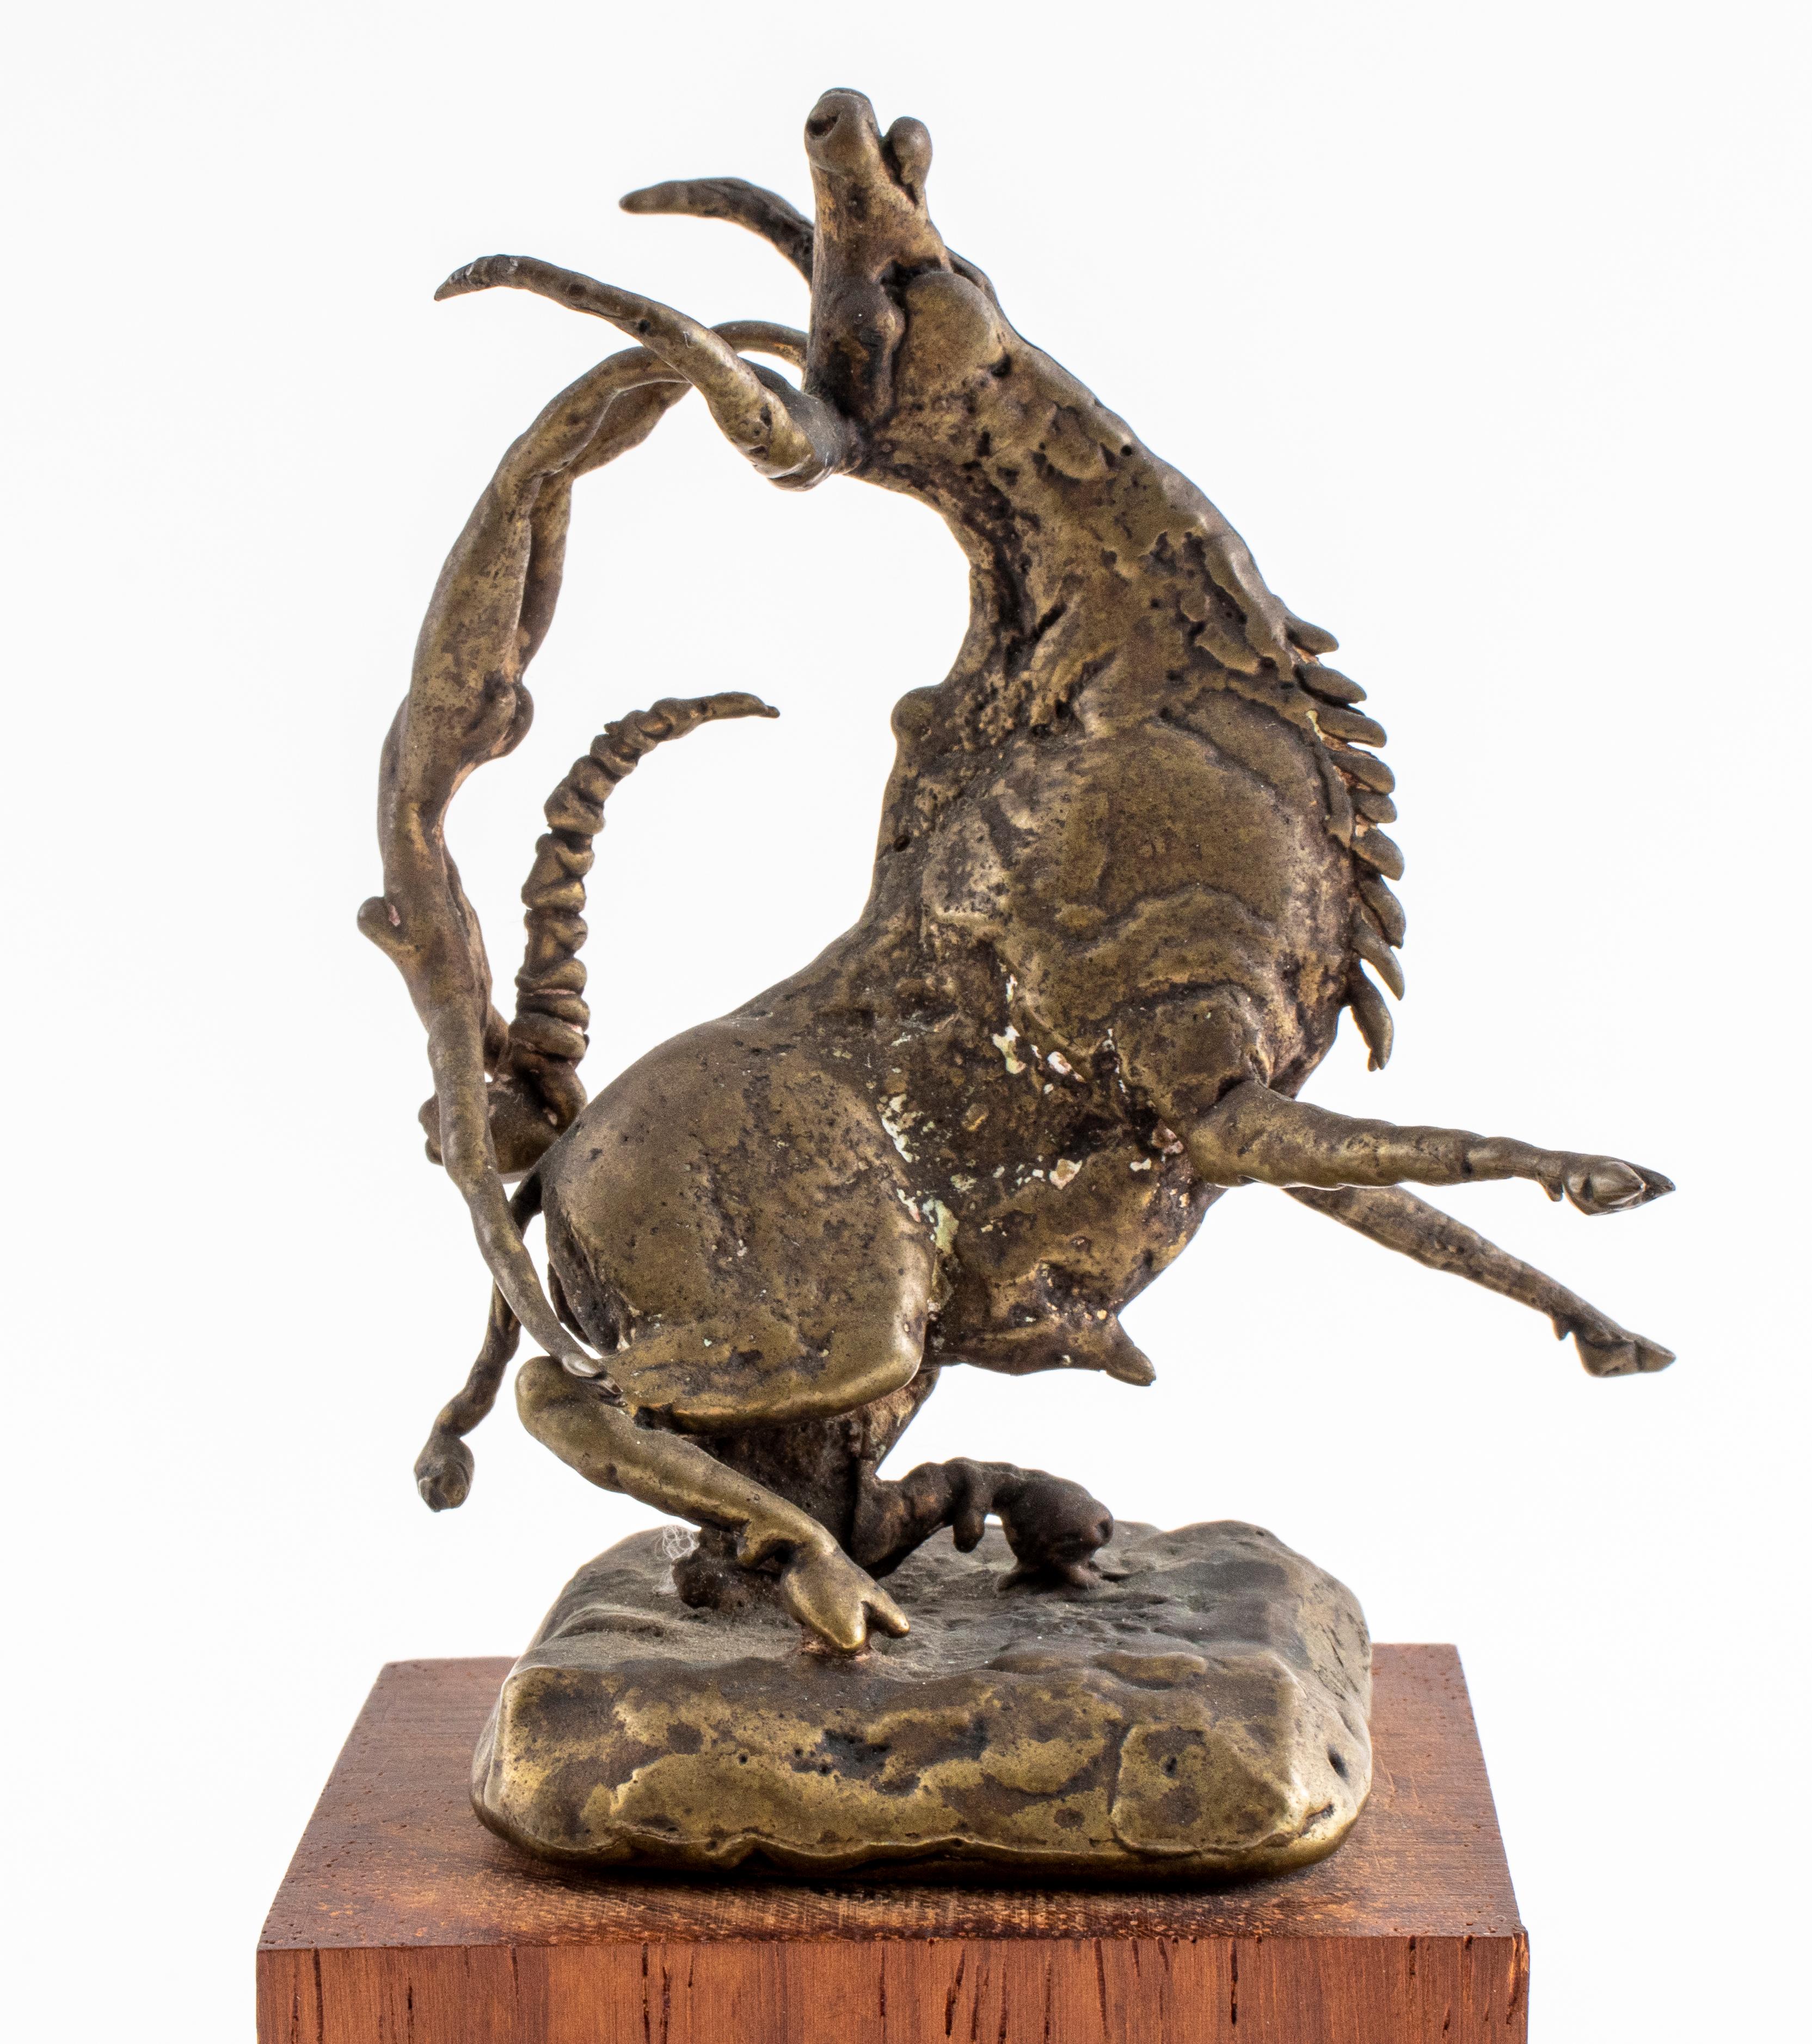 Modern Brutalist bronze sculpture of a charging longhorn or bull in motion, with a nude woman acrobat balancing on its horns, on a wooden base, incised with signature and edition number on side of bronze base.